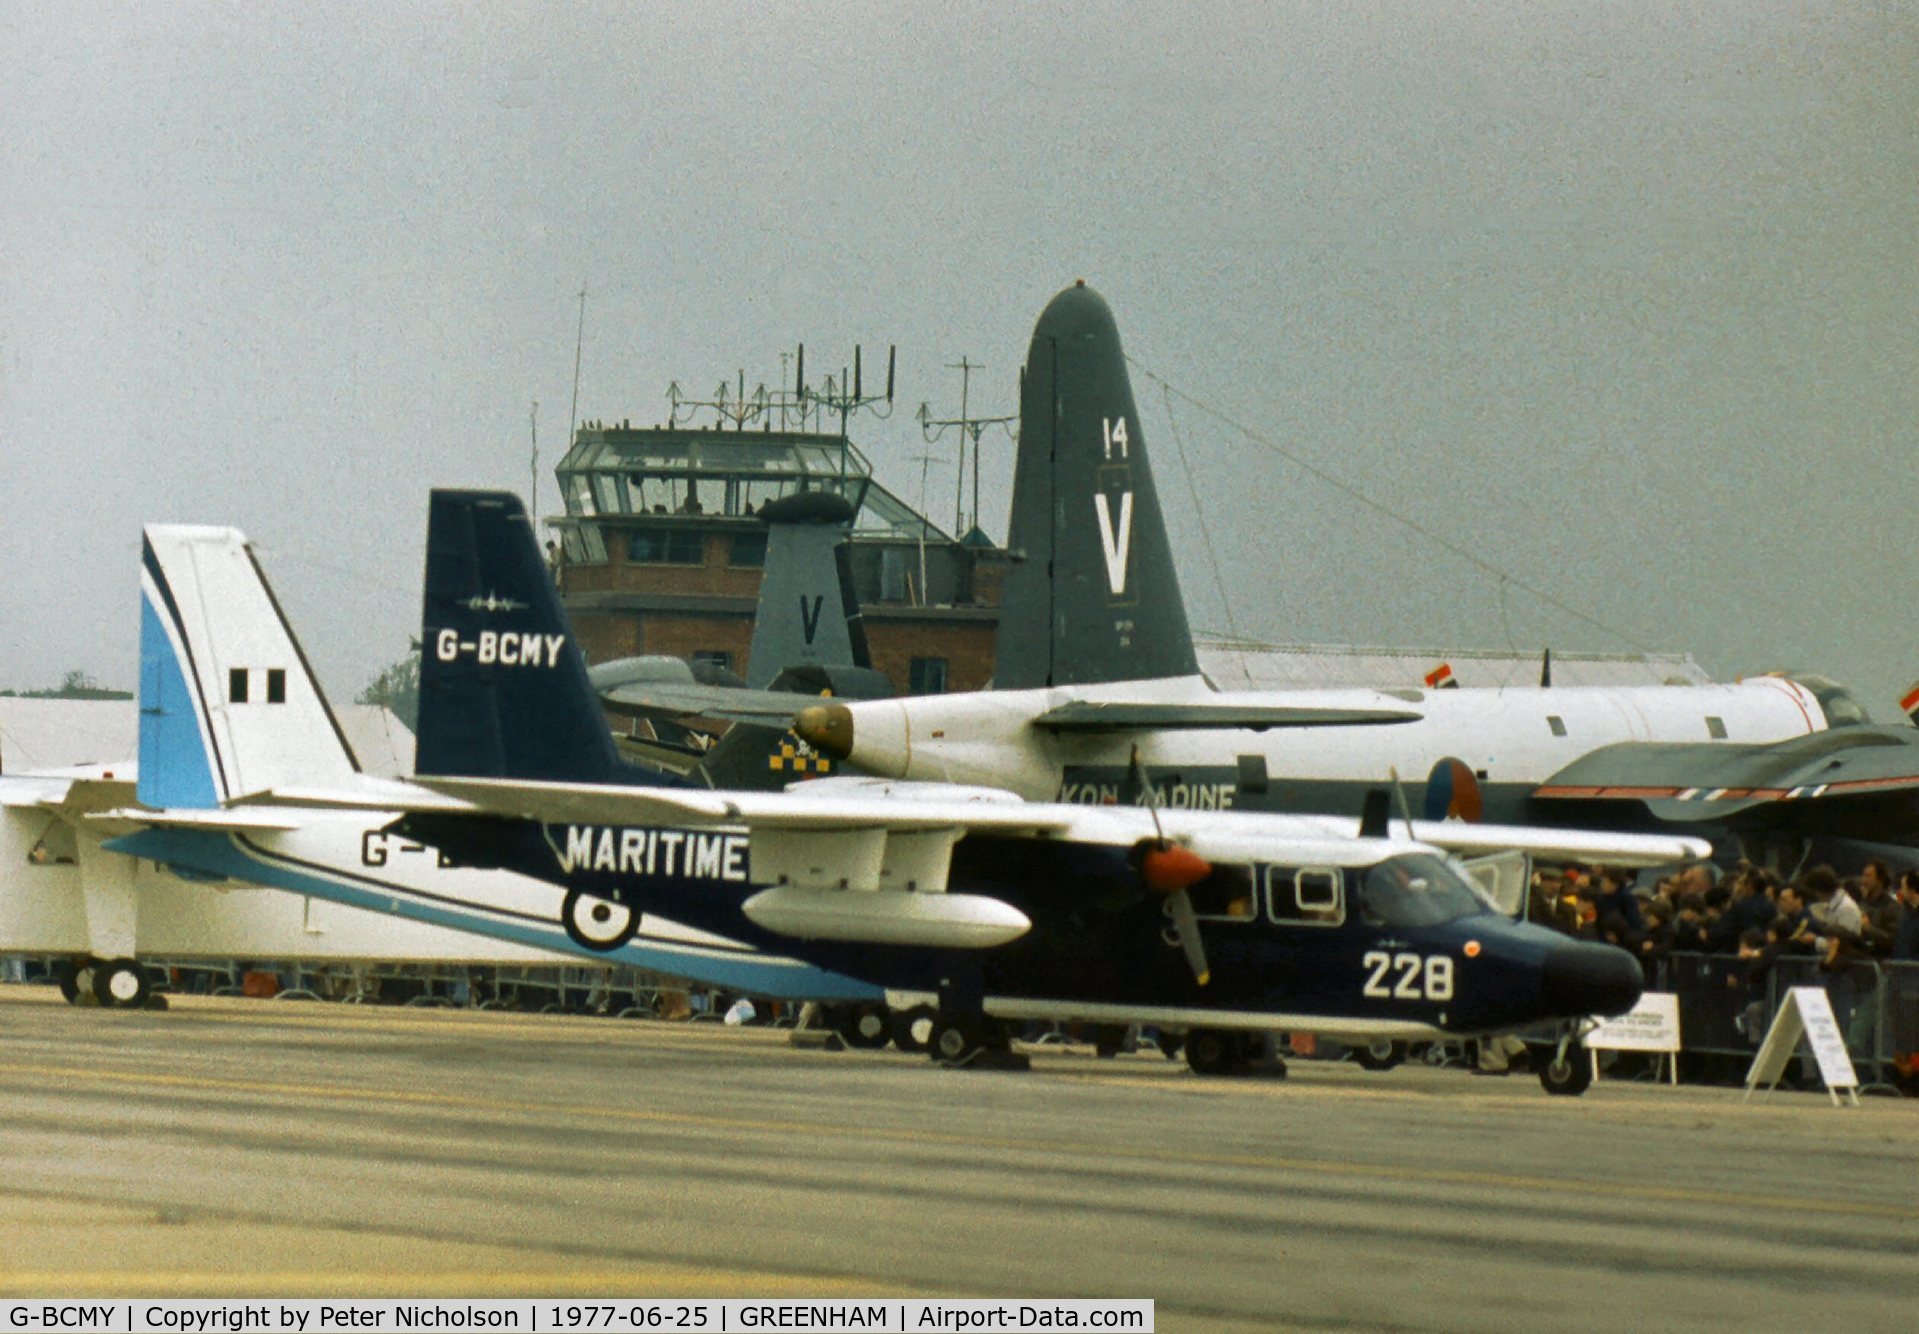 G-BCMY, 1974 Britten-Norman BN-2T Islander C/N 419, Maritime Defender version of the Islander at the 1977 Intnl Air Tattoo at RAF Greenham Common still displaying the Paris Air Show number 228 from earlier in the year.